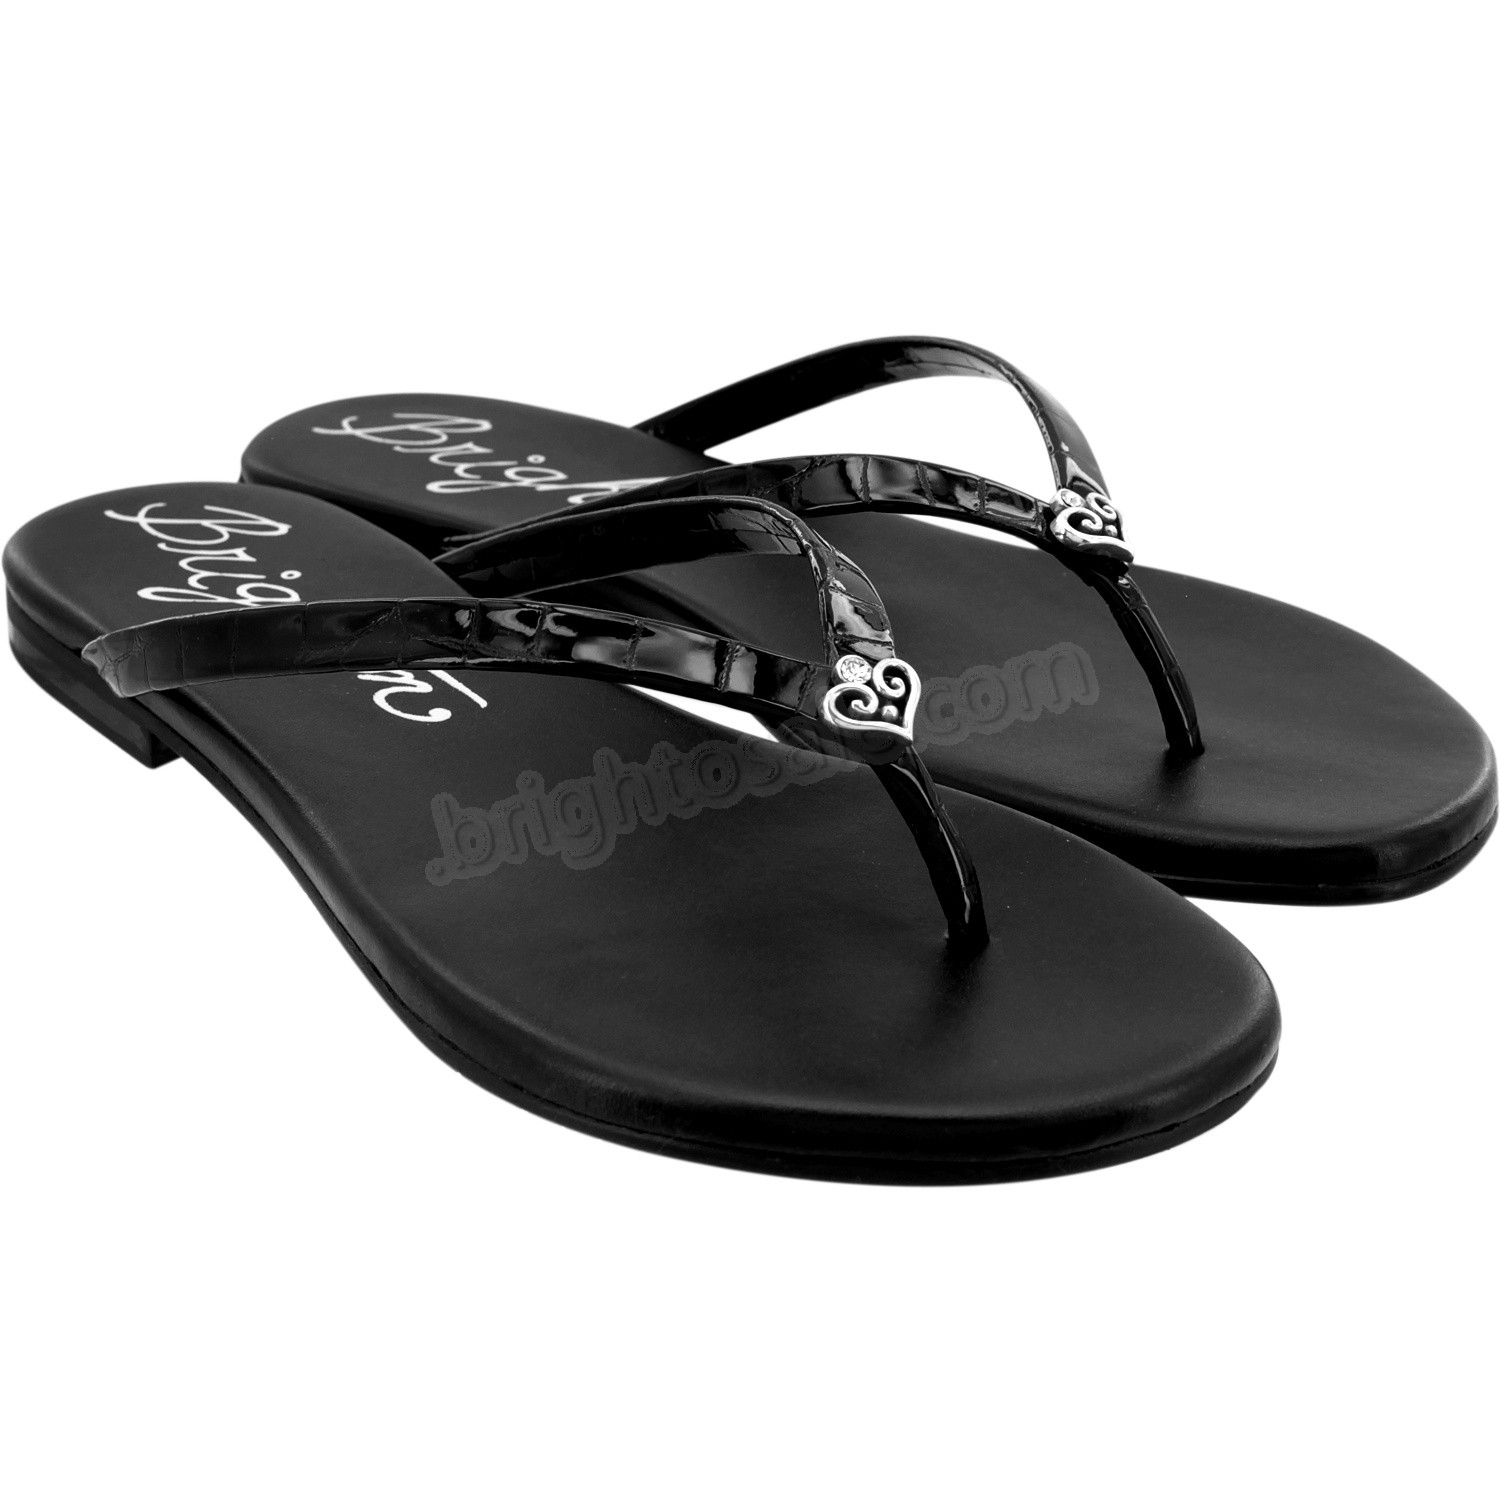 Brighton Collectibles & Online Discount Tonga Sandals - Brighton Collectibles & Online Discount Tonga Sandals